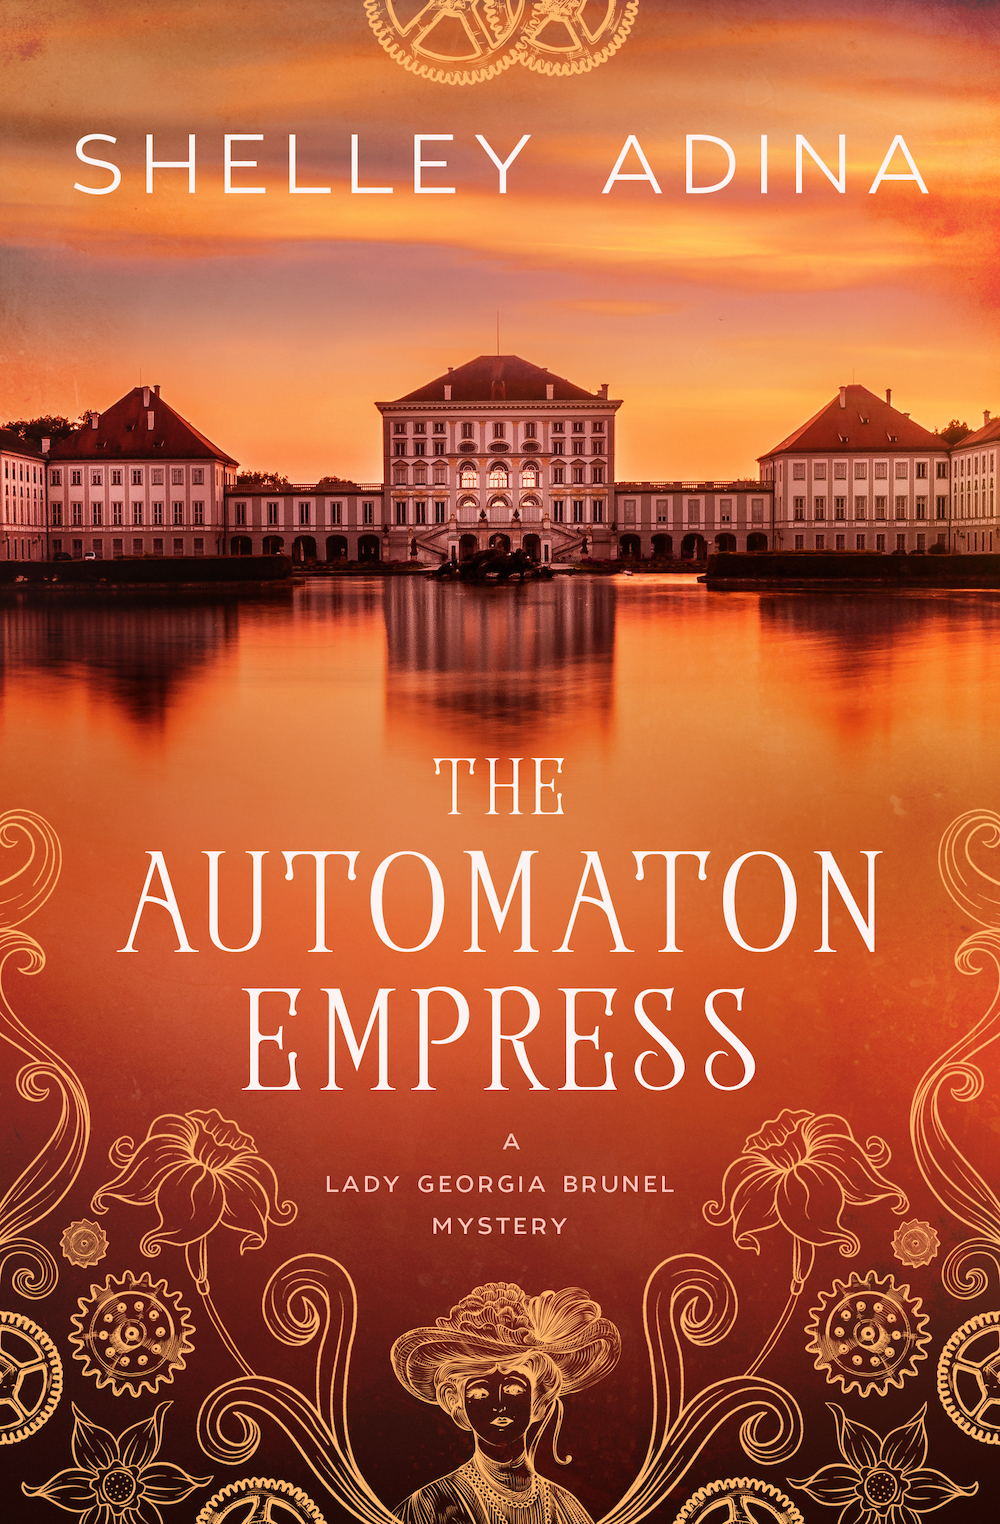 The Automaton Empress by Shelley Adina, a steampunk mystery with amateur women sleuths and later in life romance! 